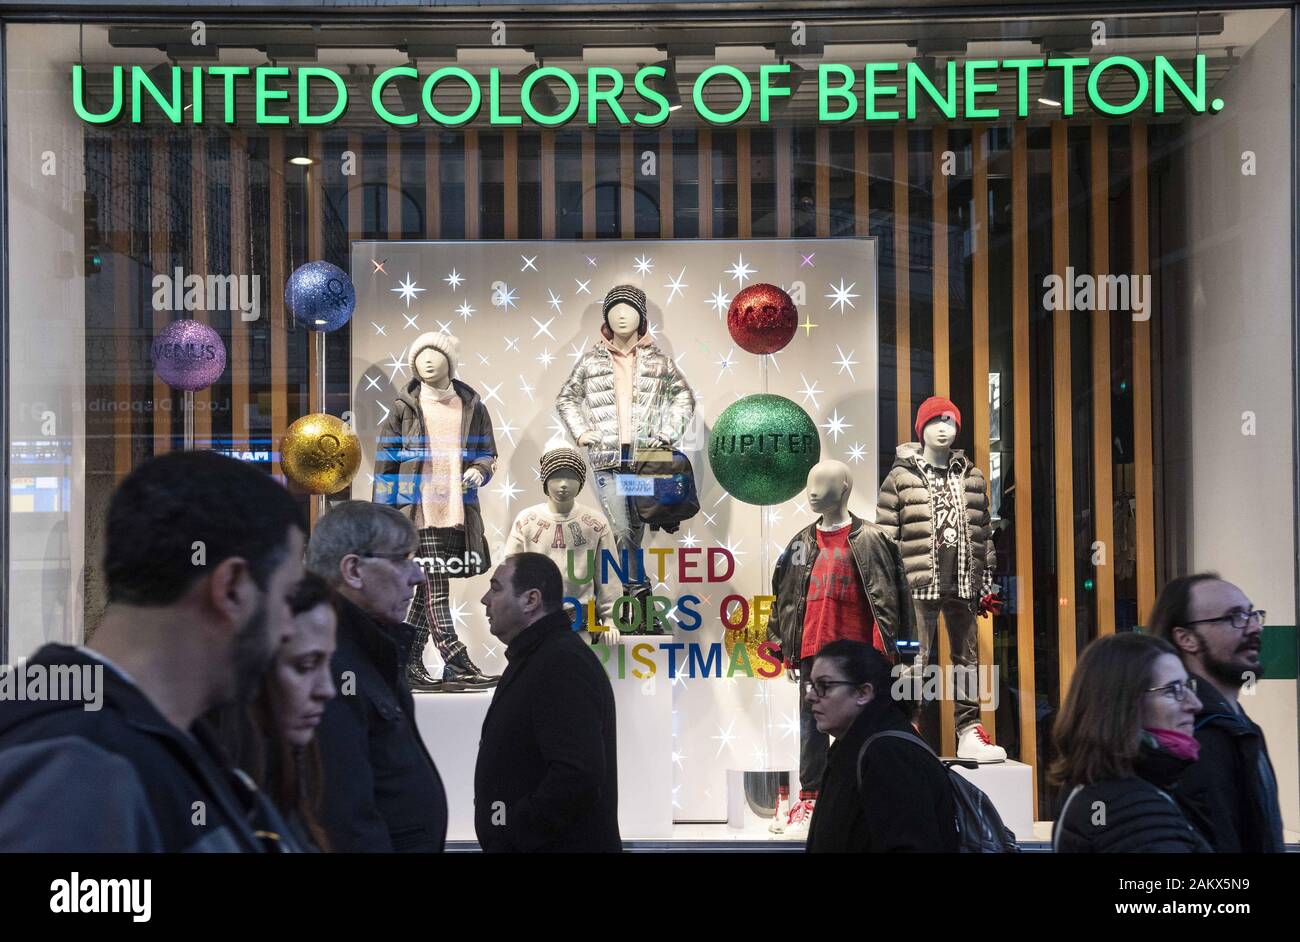 Italian fashion brand United Colors of Benetton store seen in Spain Stock  Photo - Alamy